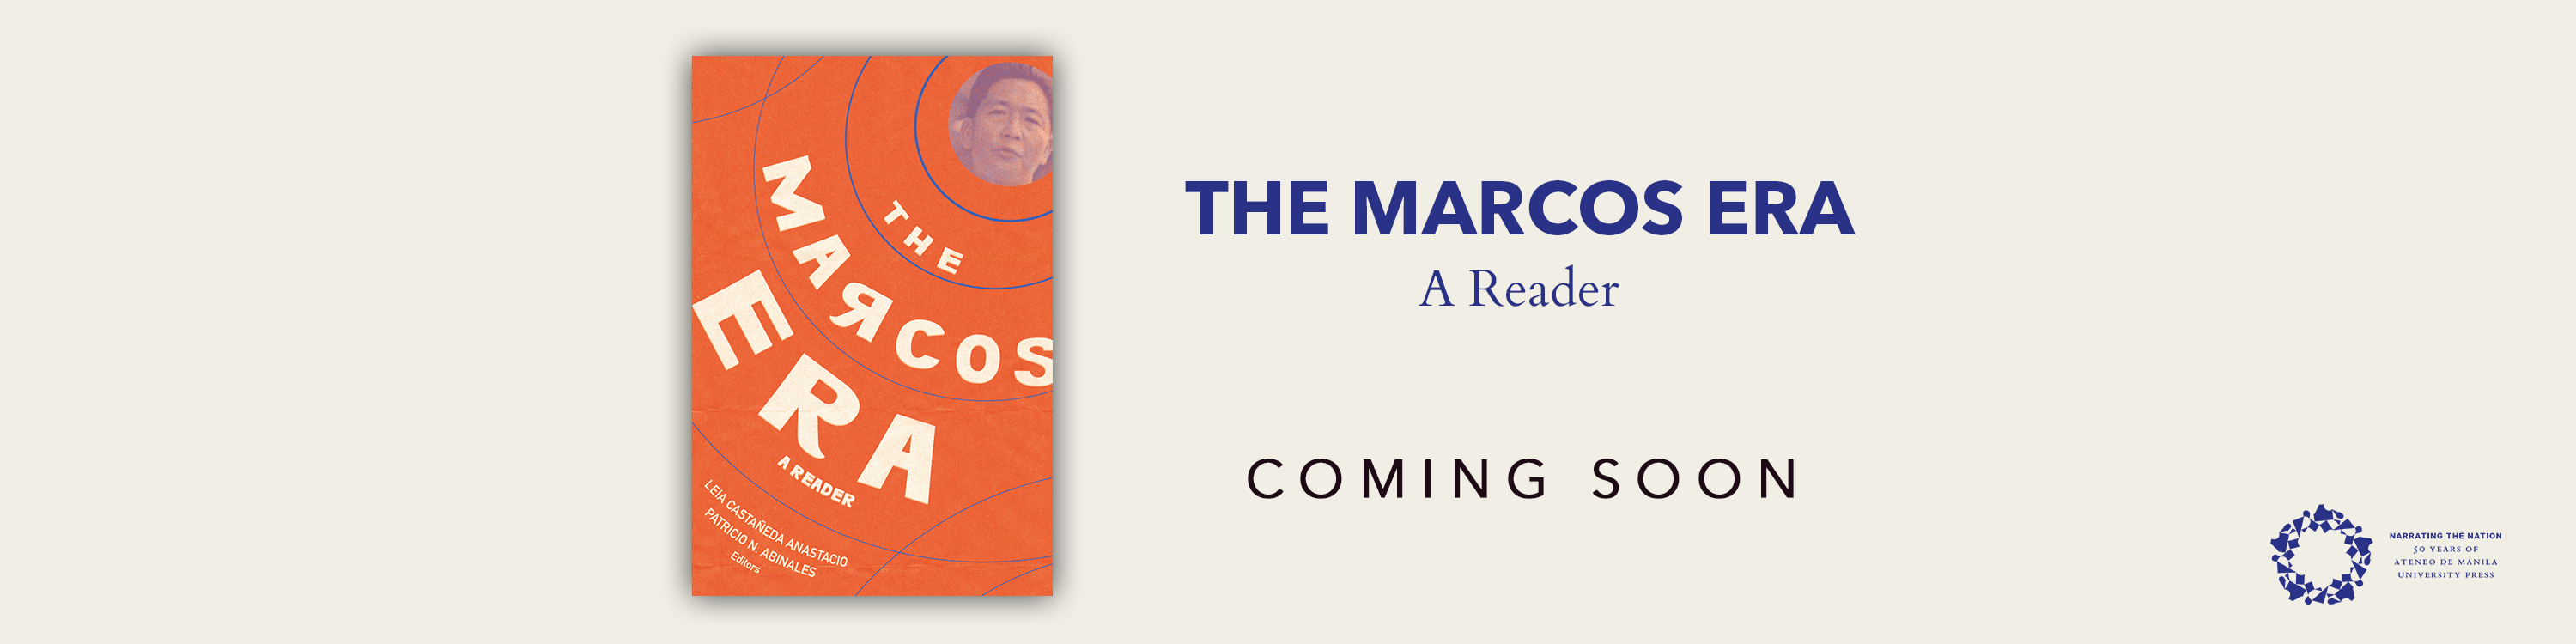 Pre-order your copy of The Marcos Era: A Reader